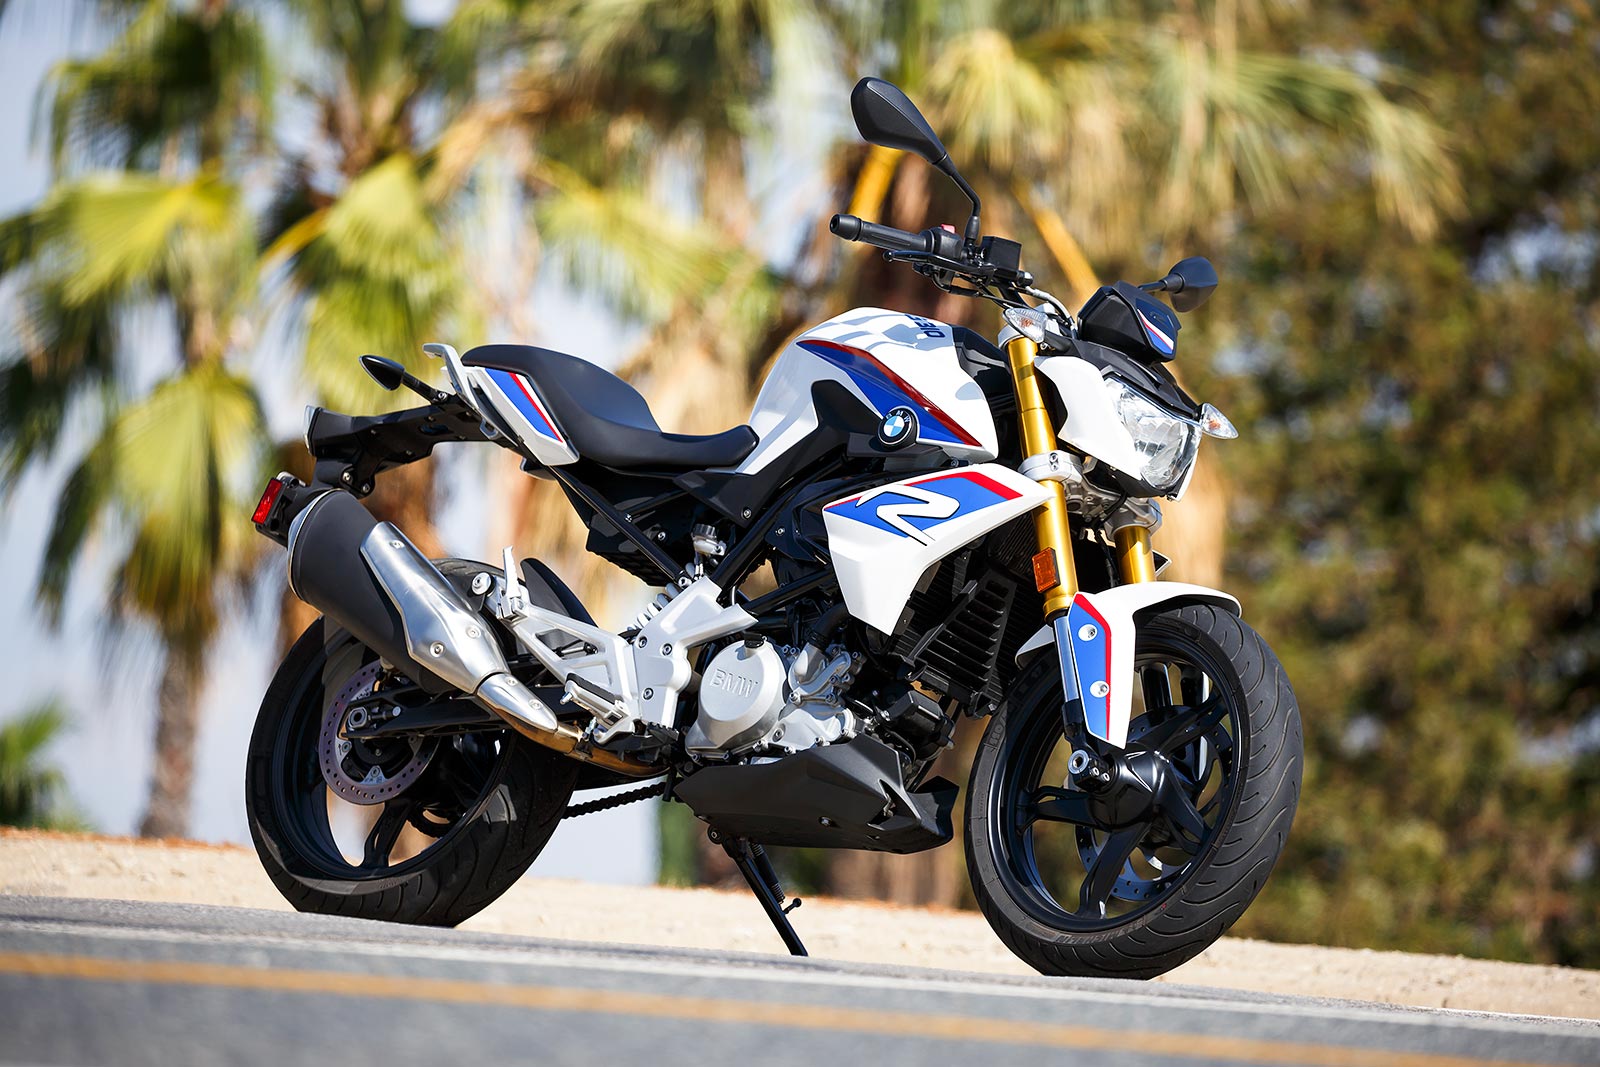 BMW G 310 R - Motorcycle news, Motorcycle reviews from Malaysia, Asia